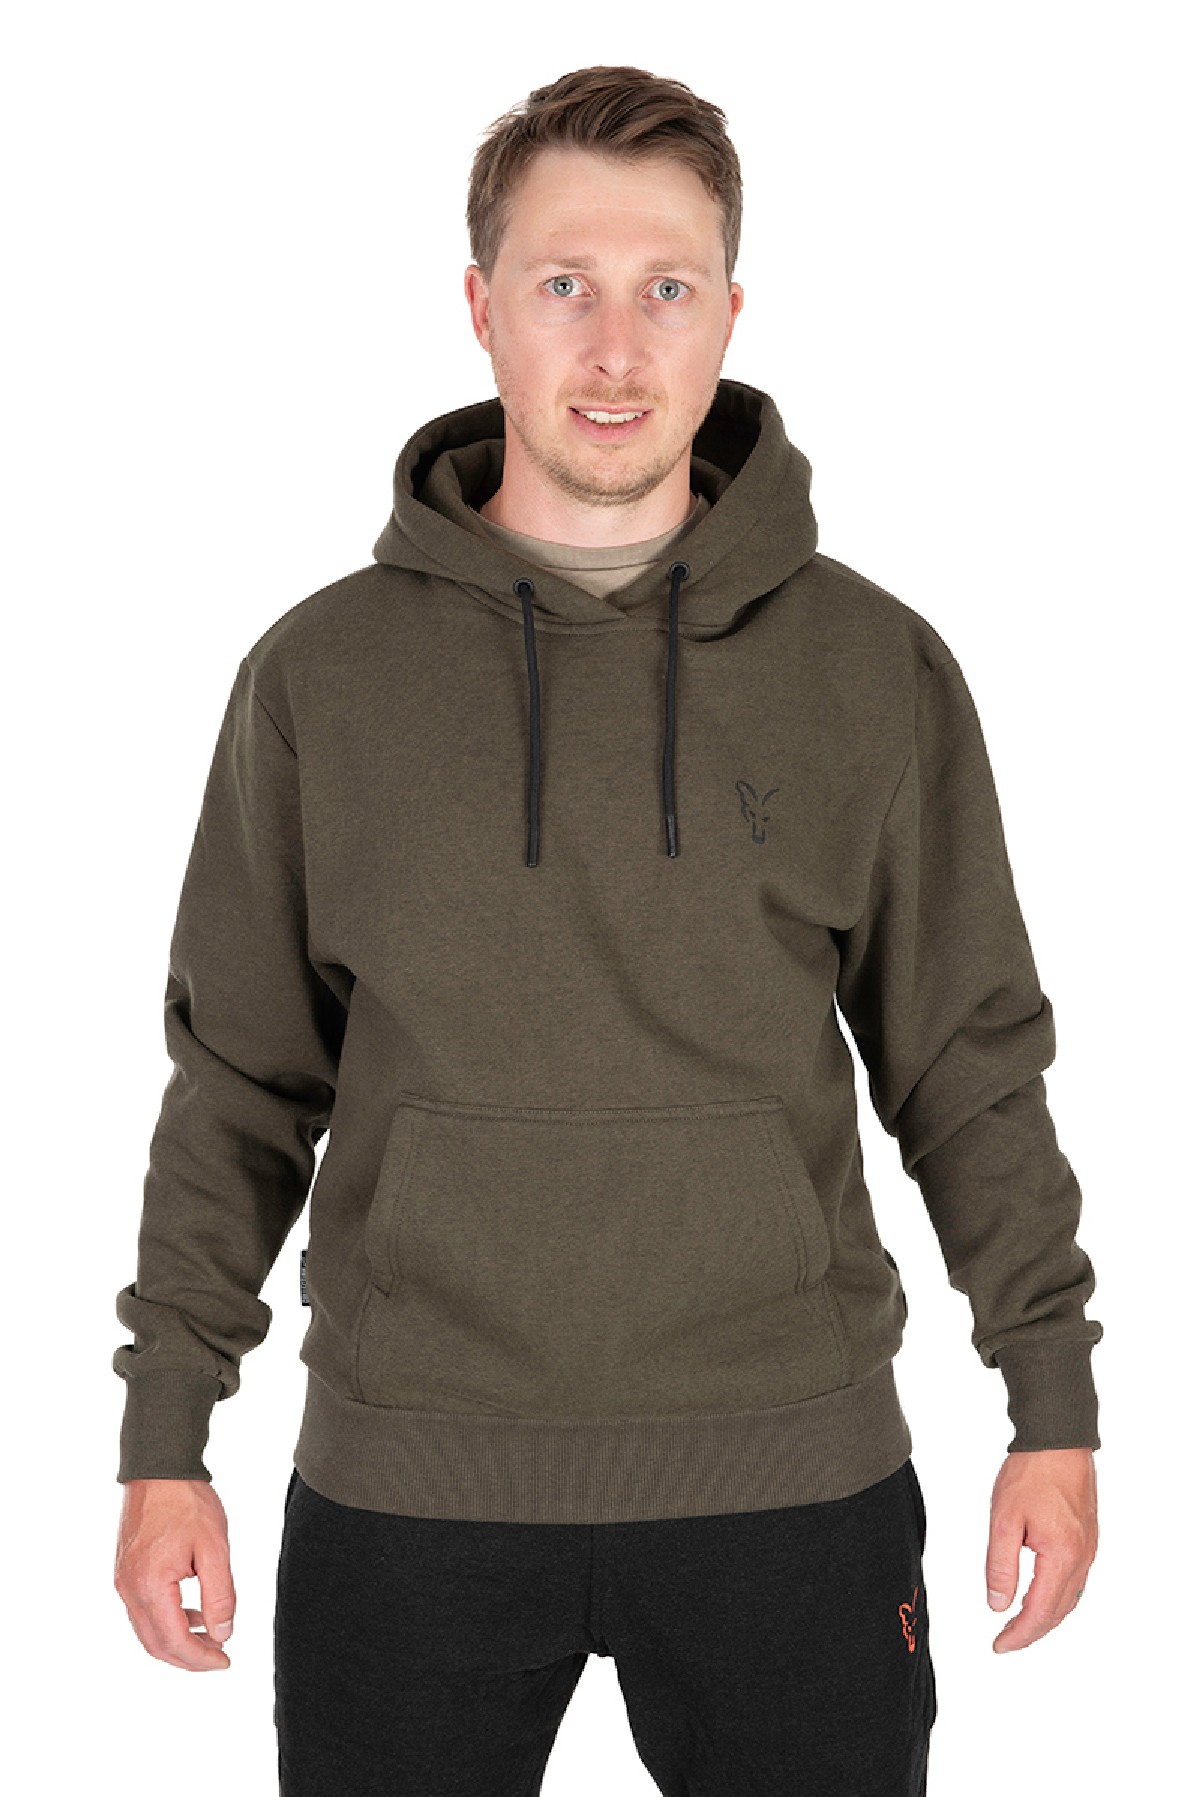 Fox Collection Hoody Green & Black XXX-Large